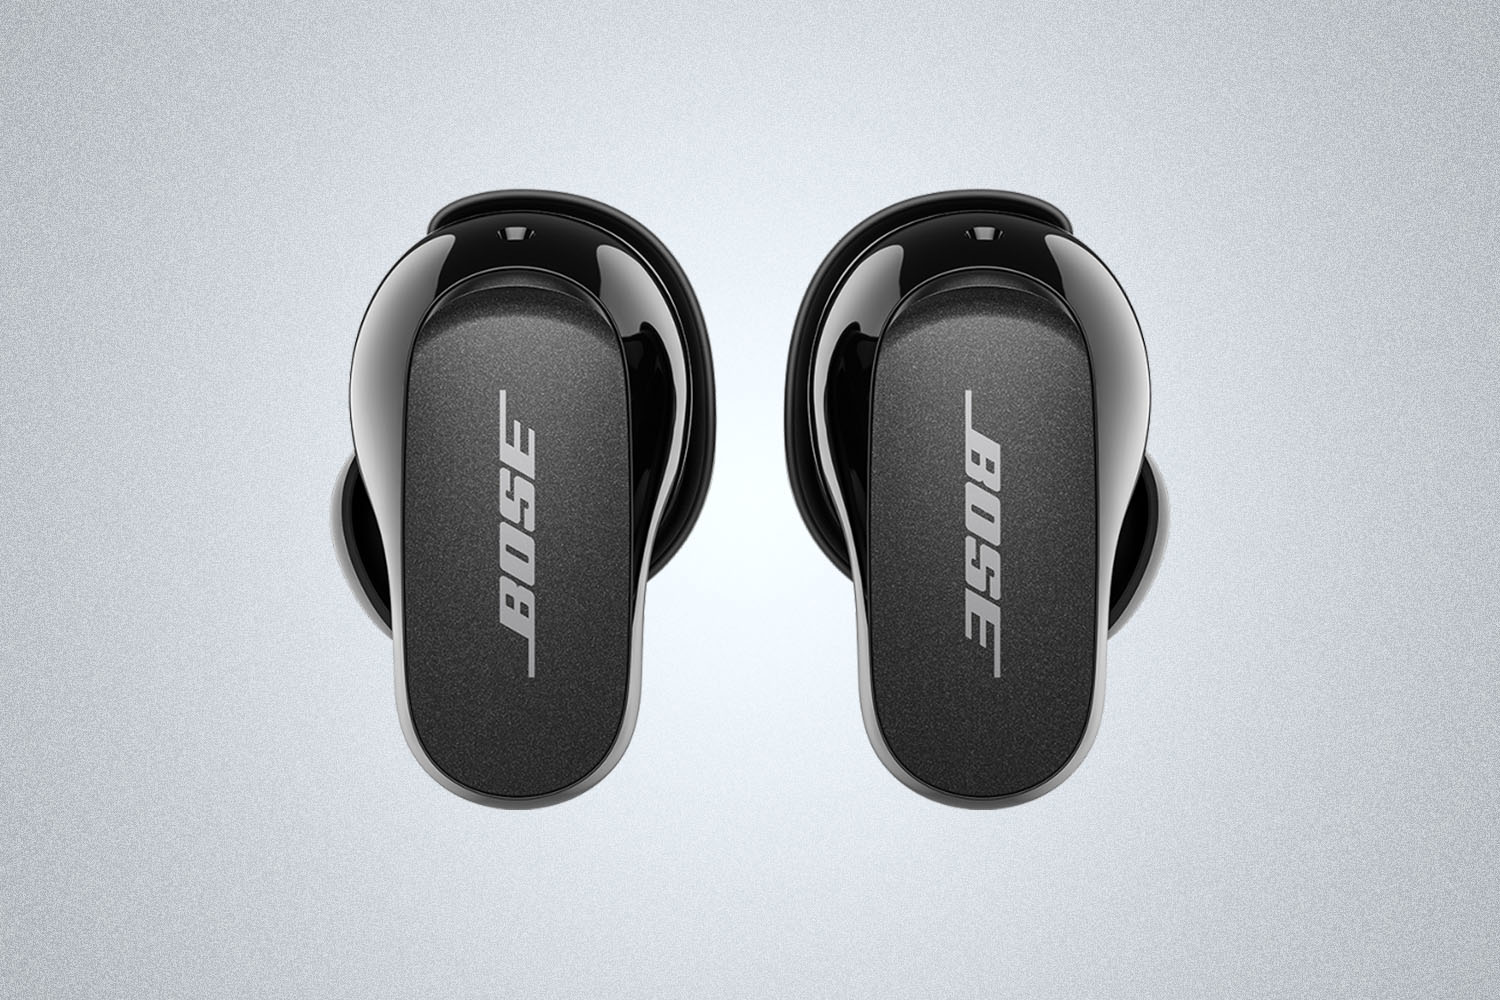 a pair of Black Bose QuietComfort II Earbuds on a grey background